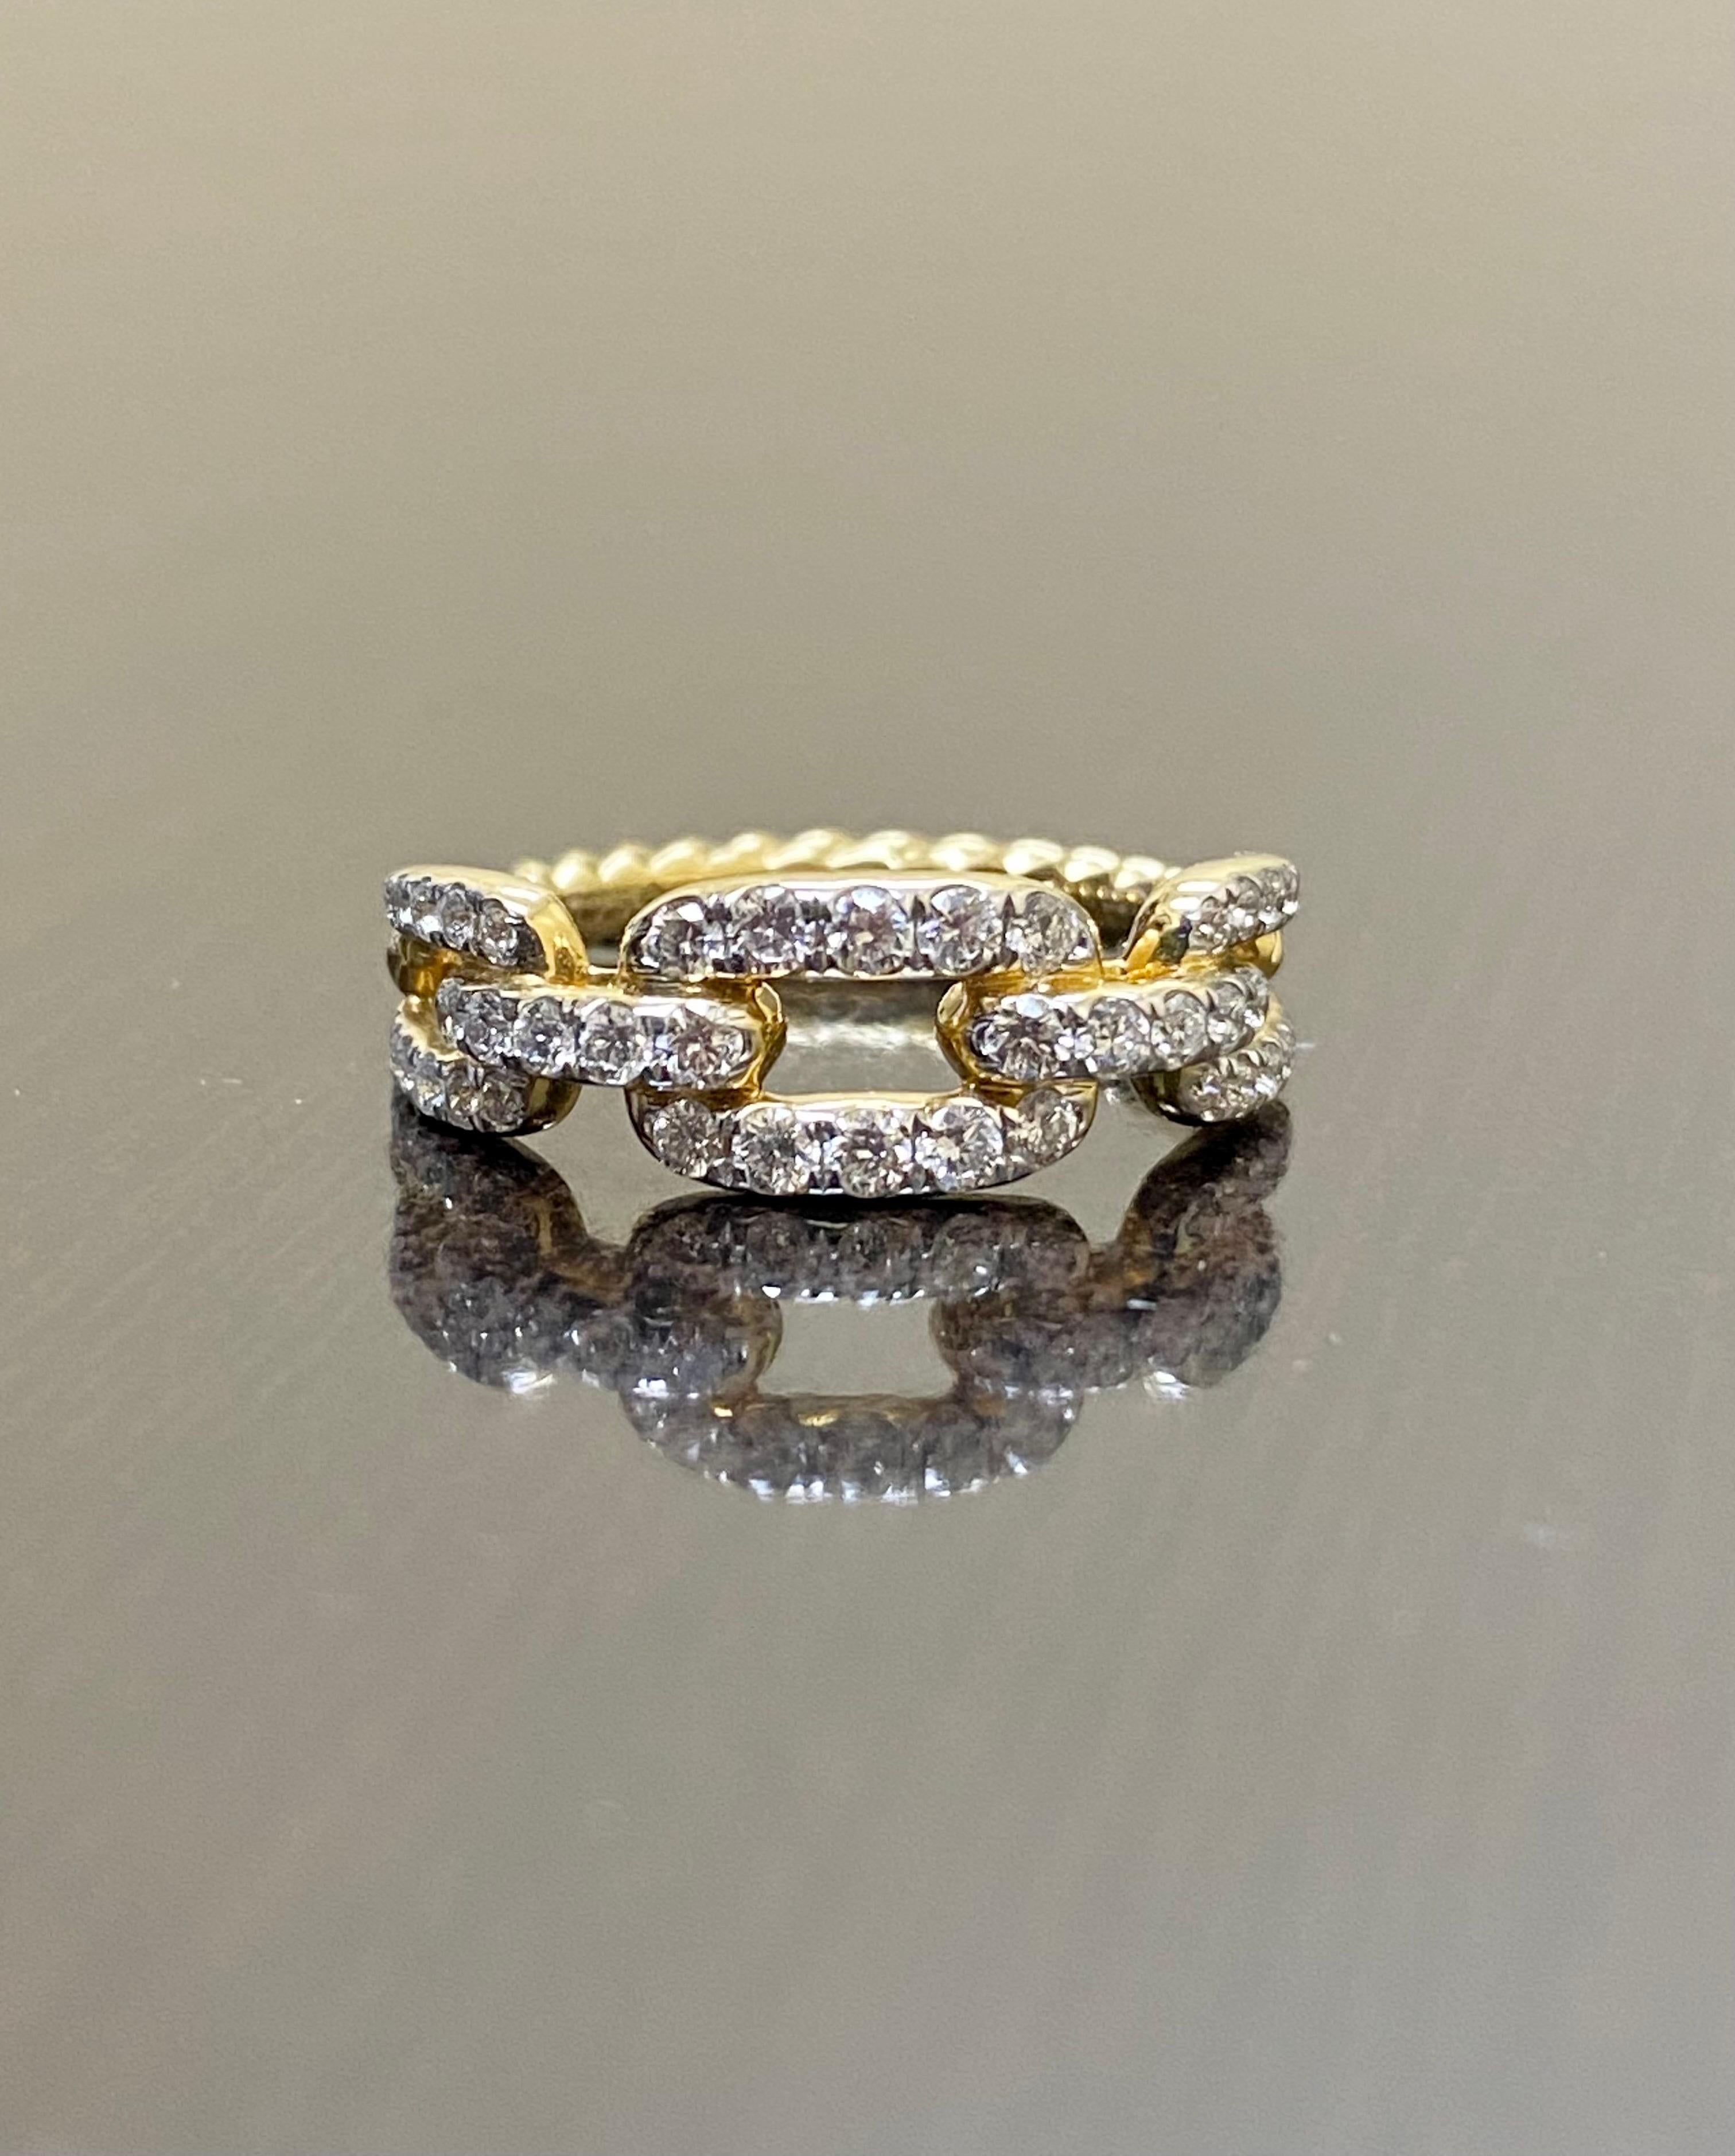 DeKara Design Designer Collection

Metal- 18K Yellow Gold, .750.

Stones- 48 Round Diamonds G Color VS2 Clarity 0.50 Carats.

Size-

Authentic David Yurman 18K Yellow Gold Diamond Stax Chain Link Diamond Ring From the Stax Collection. This band